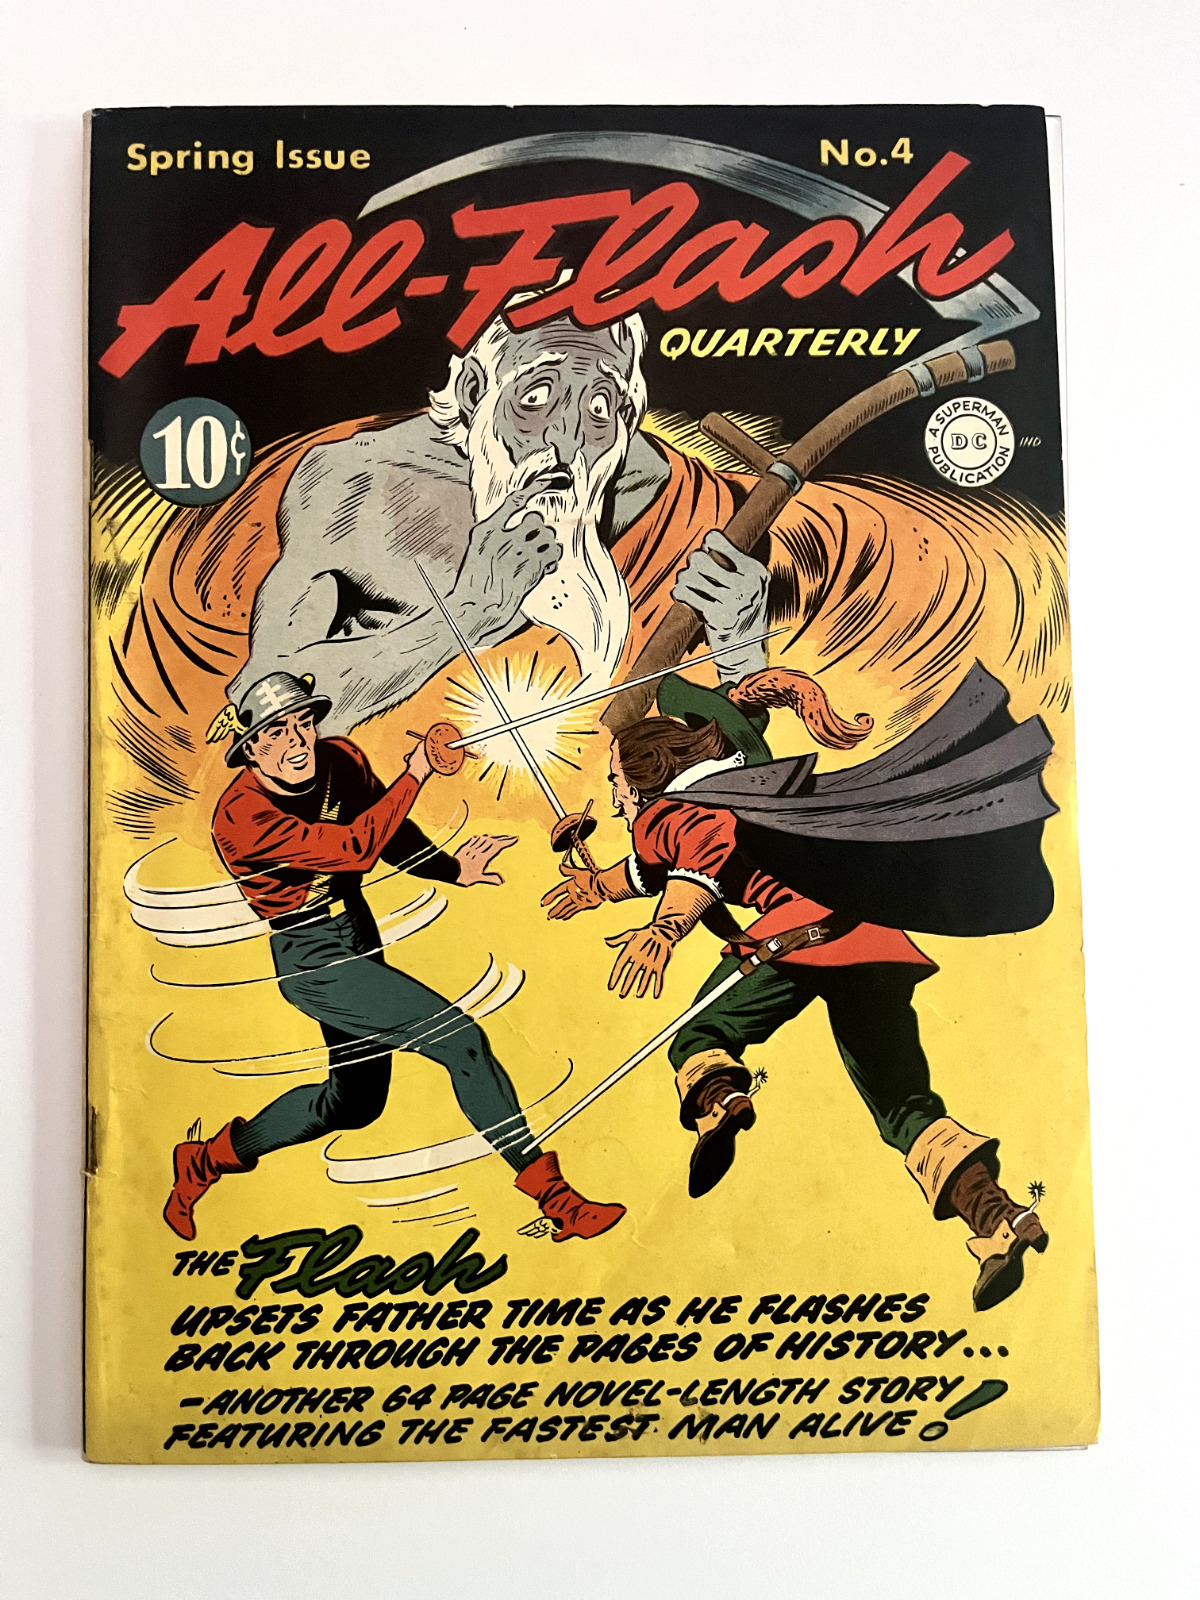 All-Flash Comics Quarterly #4 (1942 Golden Age DC Comics) White Pages [FN/FN-]